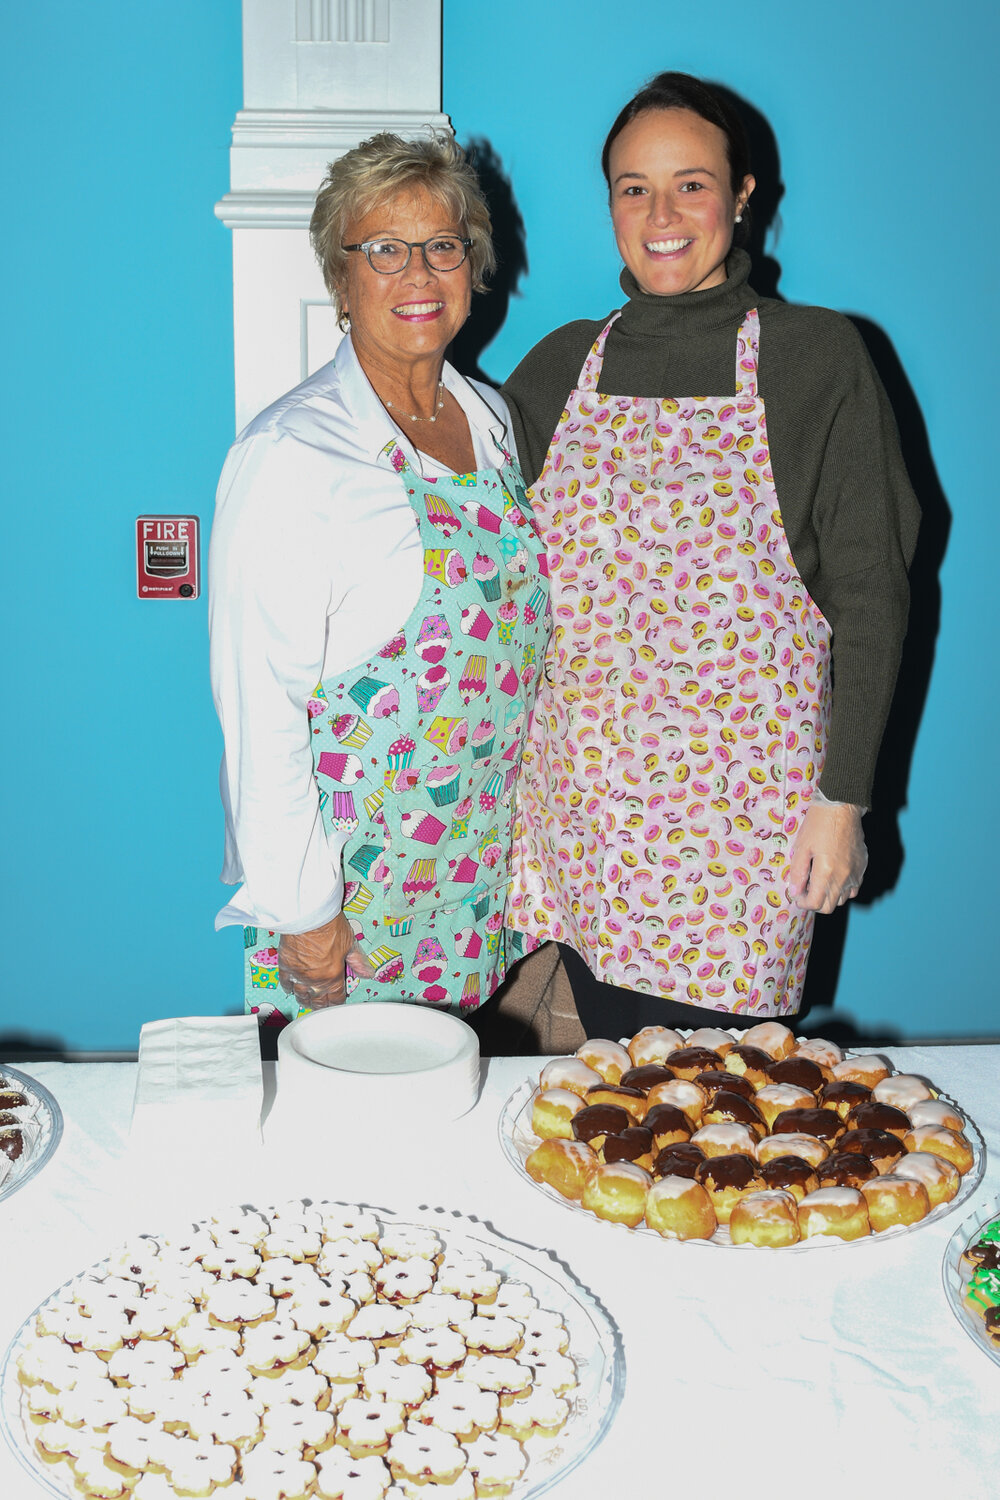 Lisa Acerno and Jessica Callaghan from Front Street Bakery, serving samples of sweet desserts.